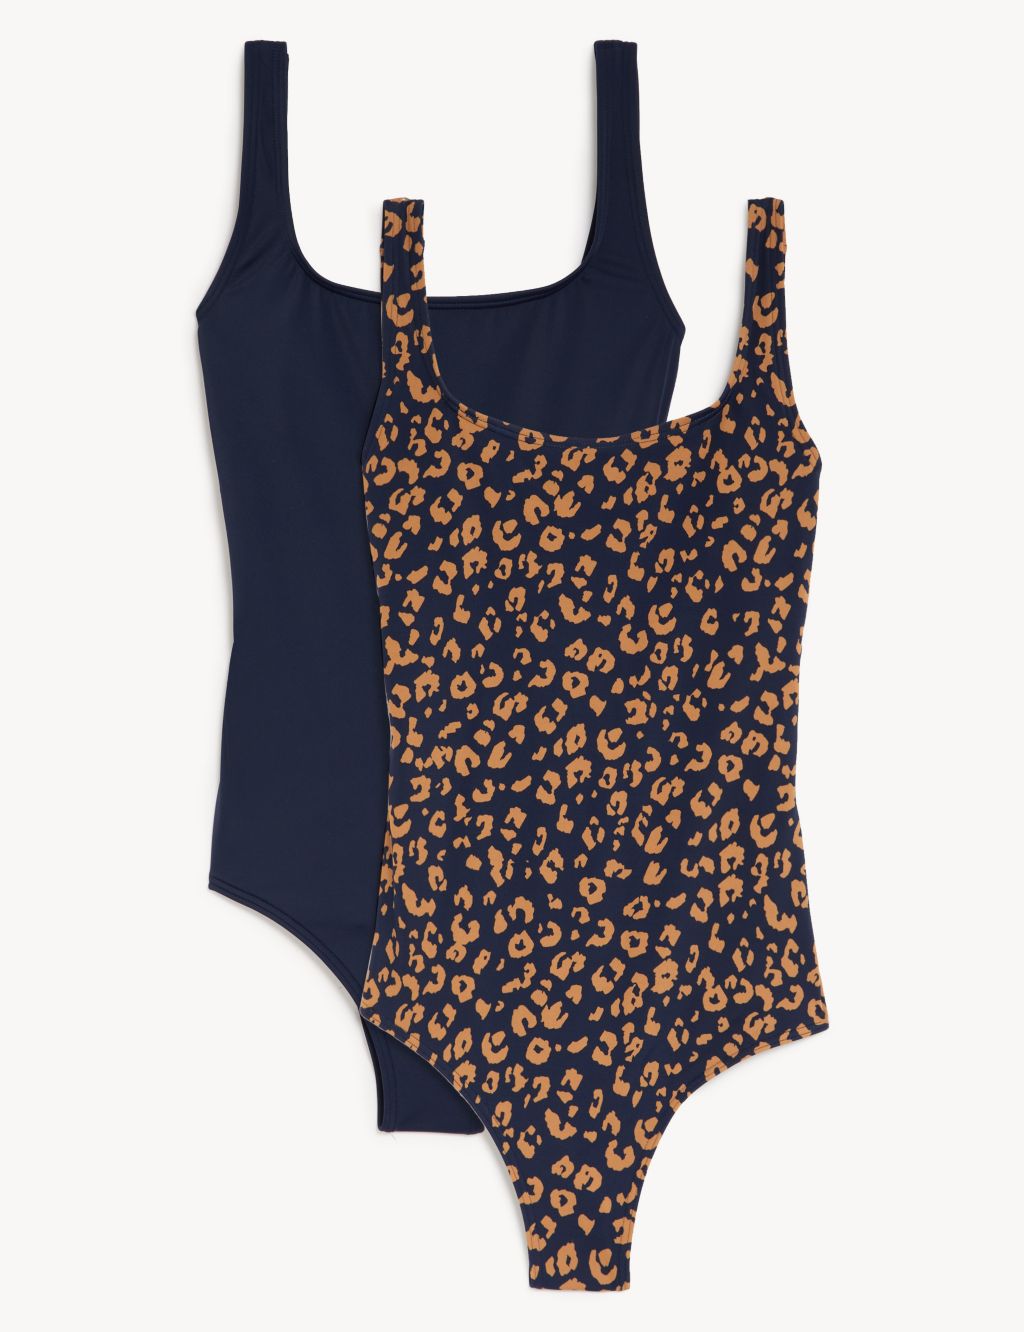 2 Pack Printed Scoop Neck Swimsuits image 1